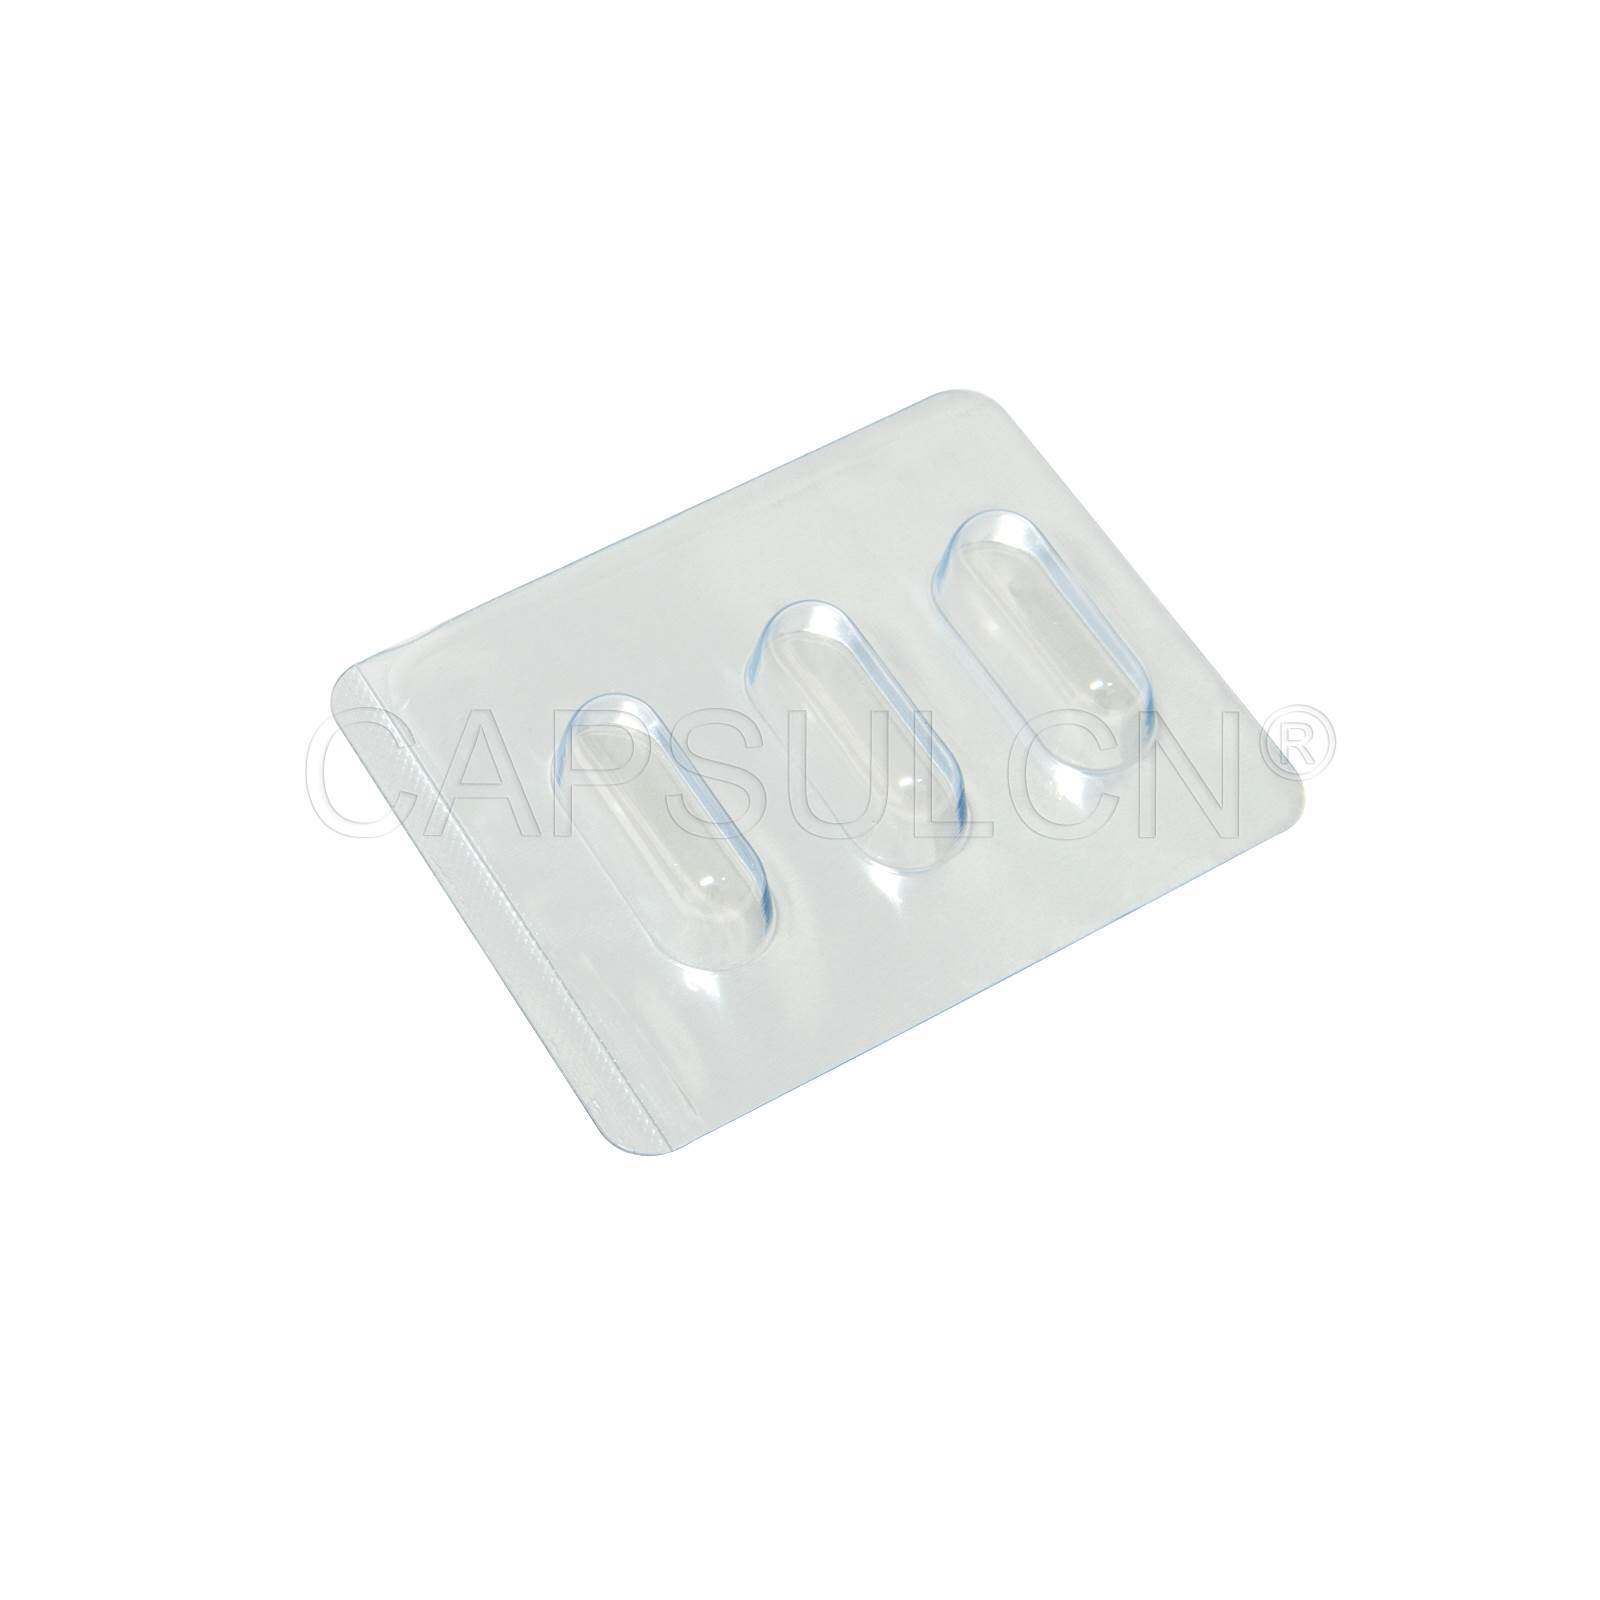 Size 00 Capsule Blister Packing Sheet with 3 holes